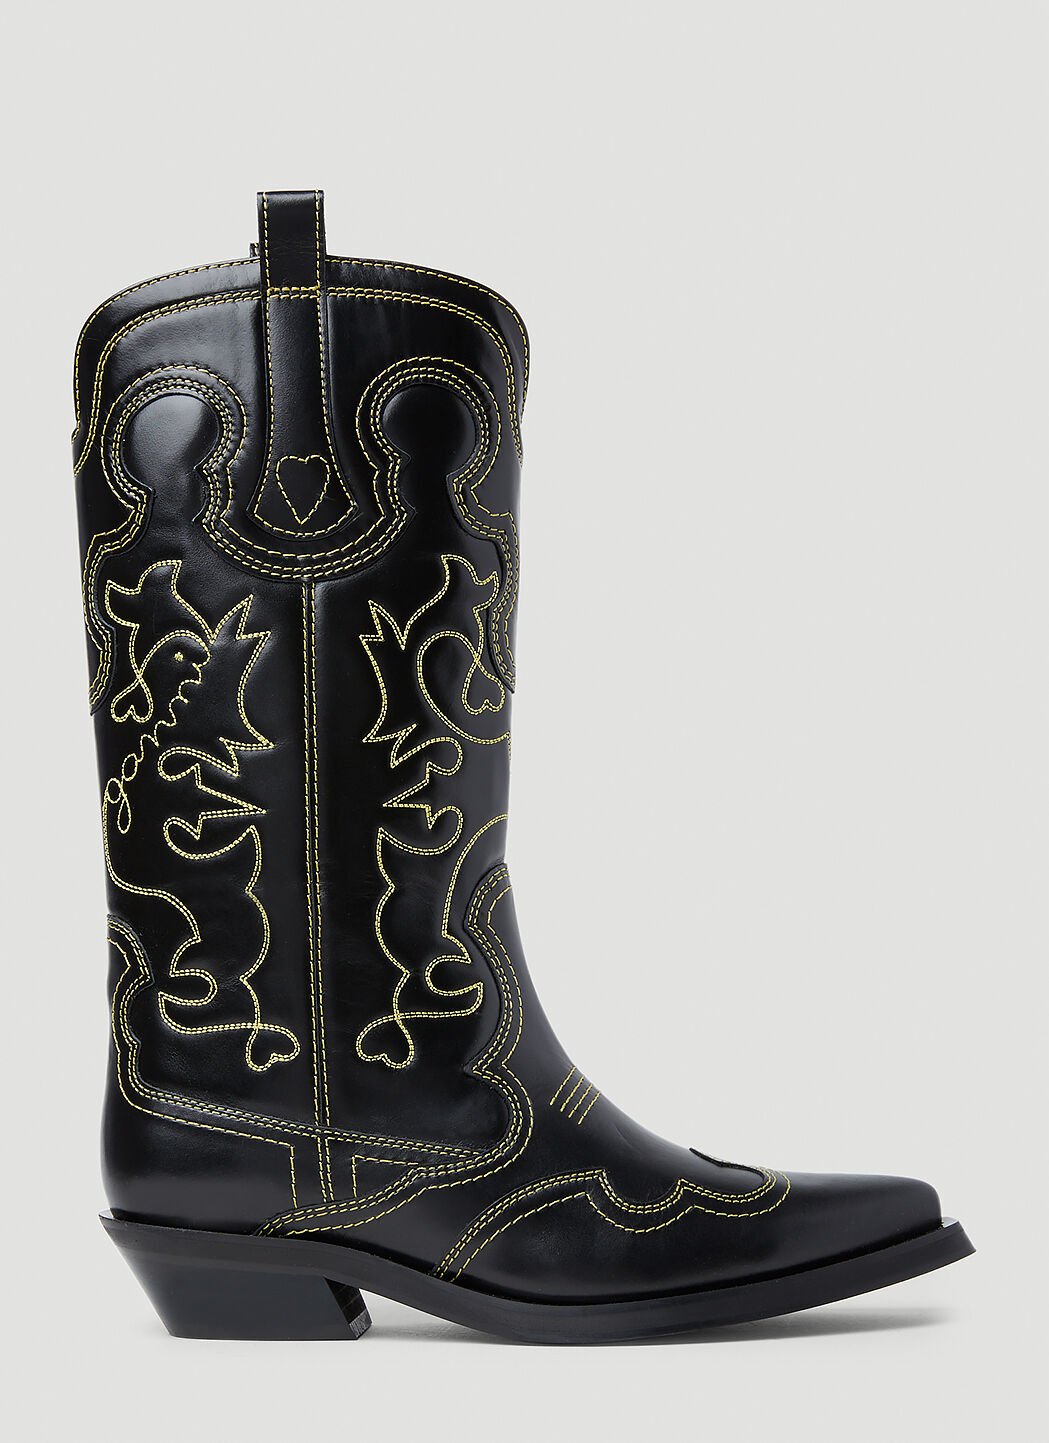 KHAITE Embroidered Western Boots Brown kha0253008